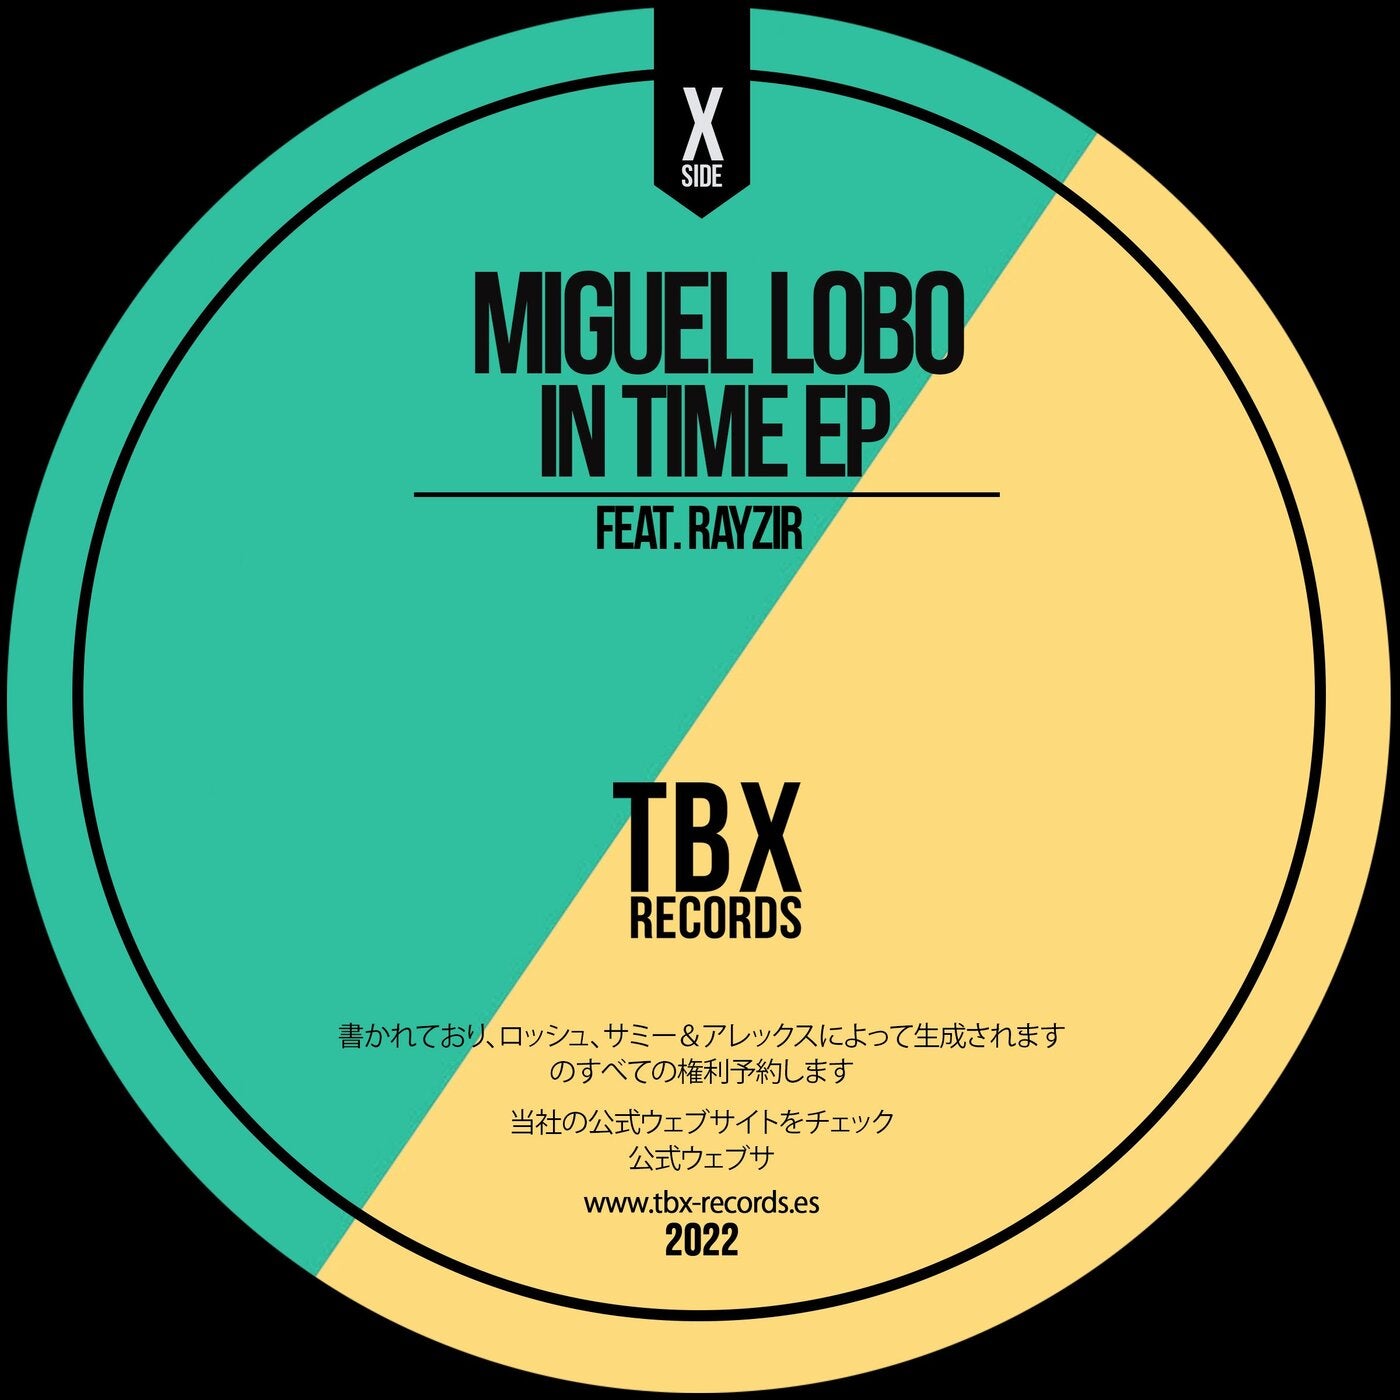 In Time EP